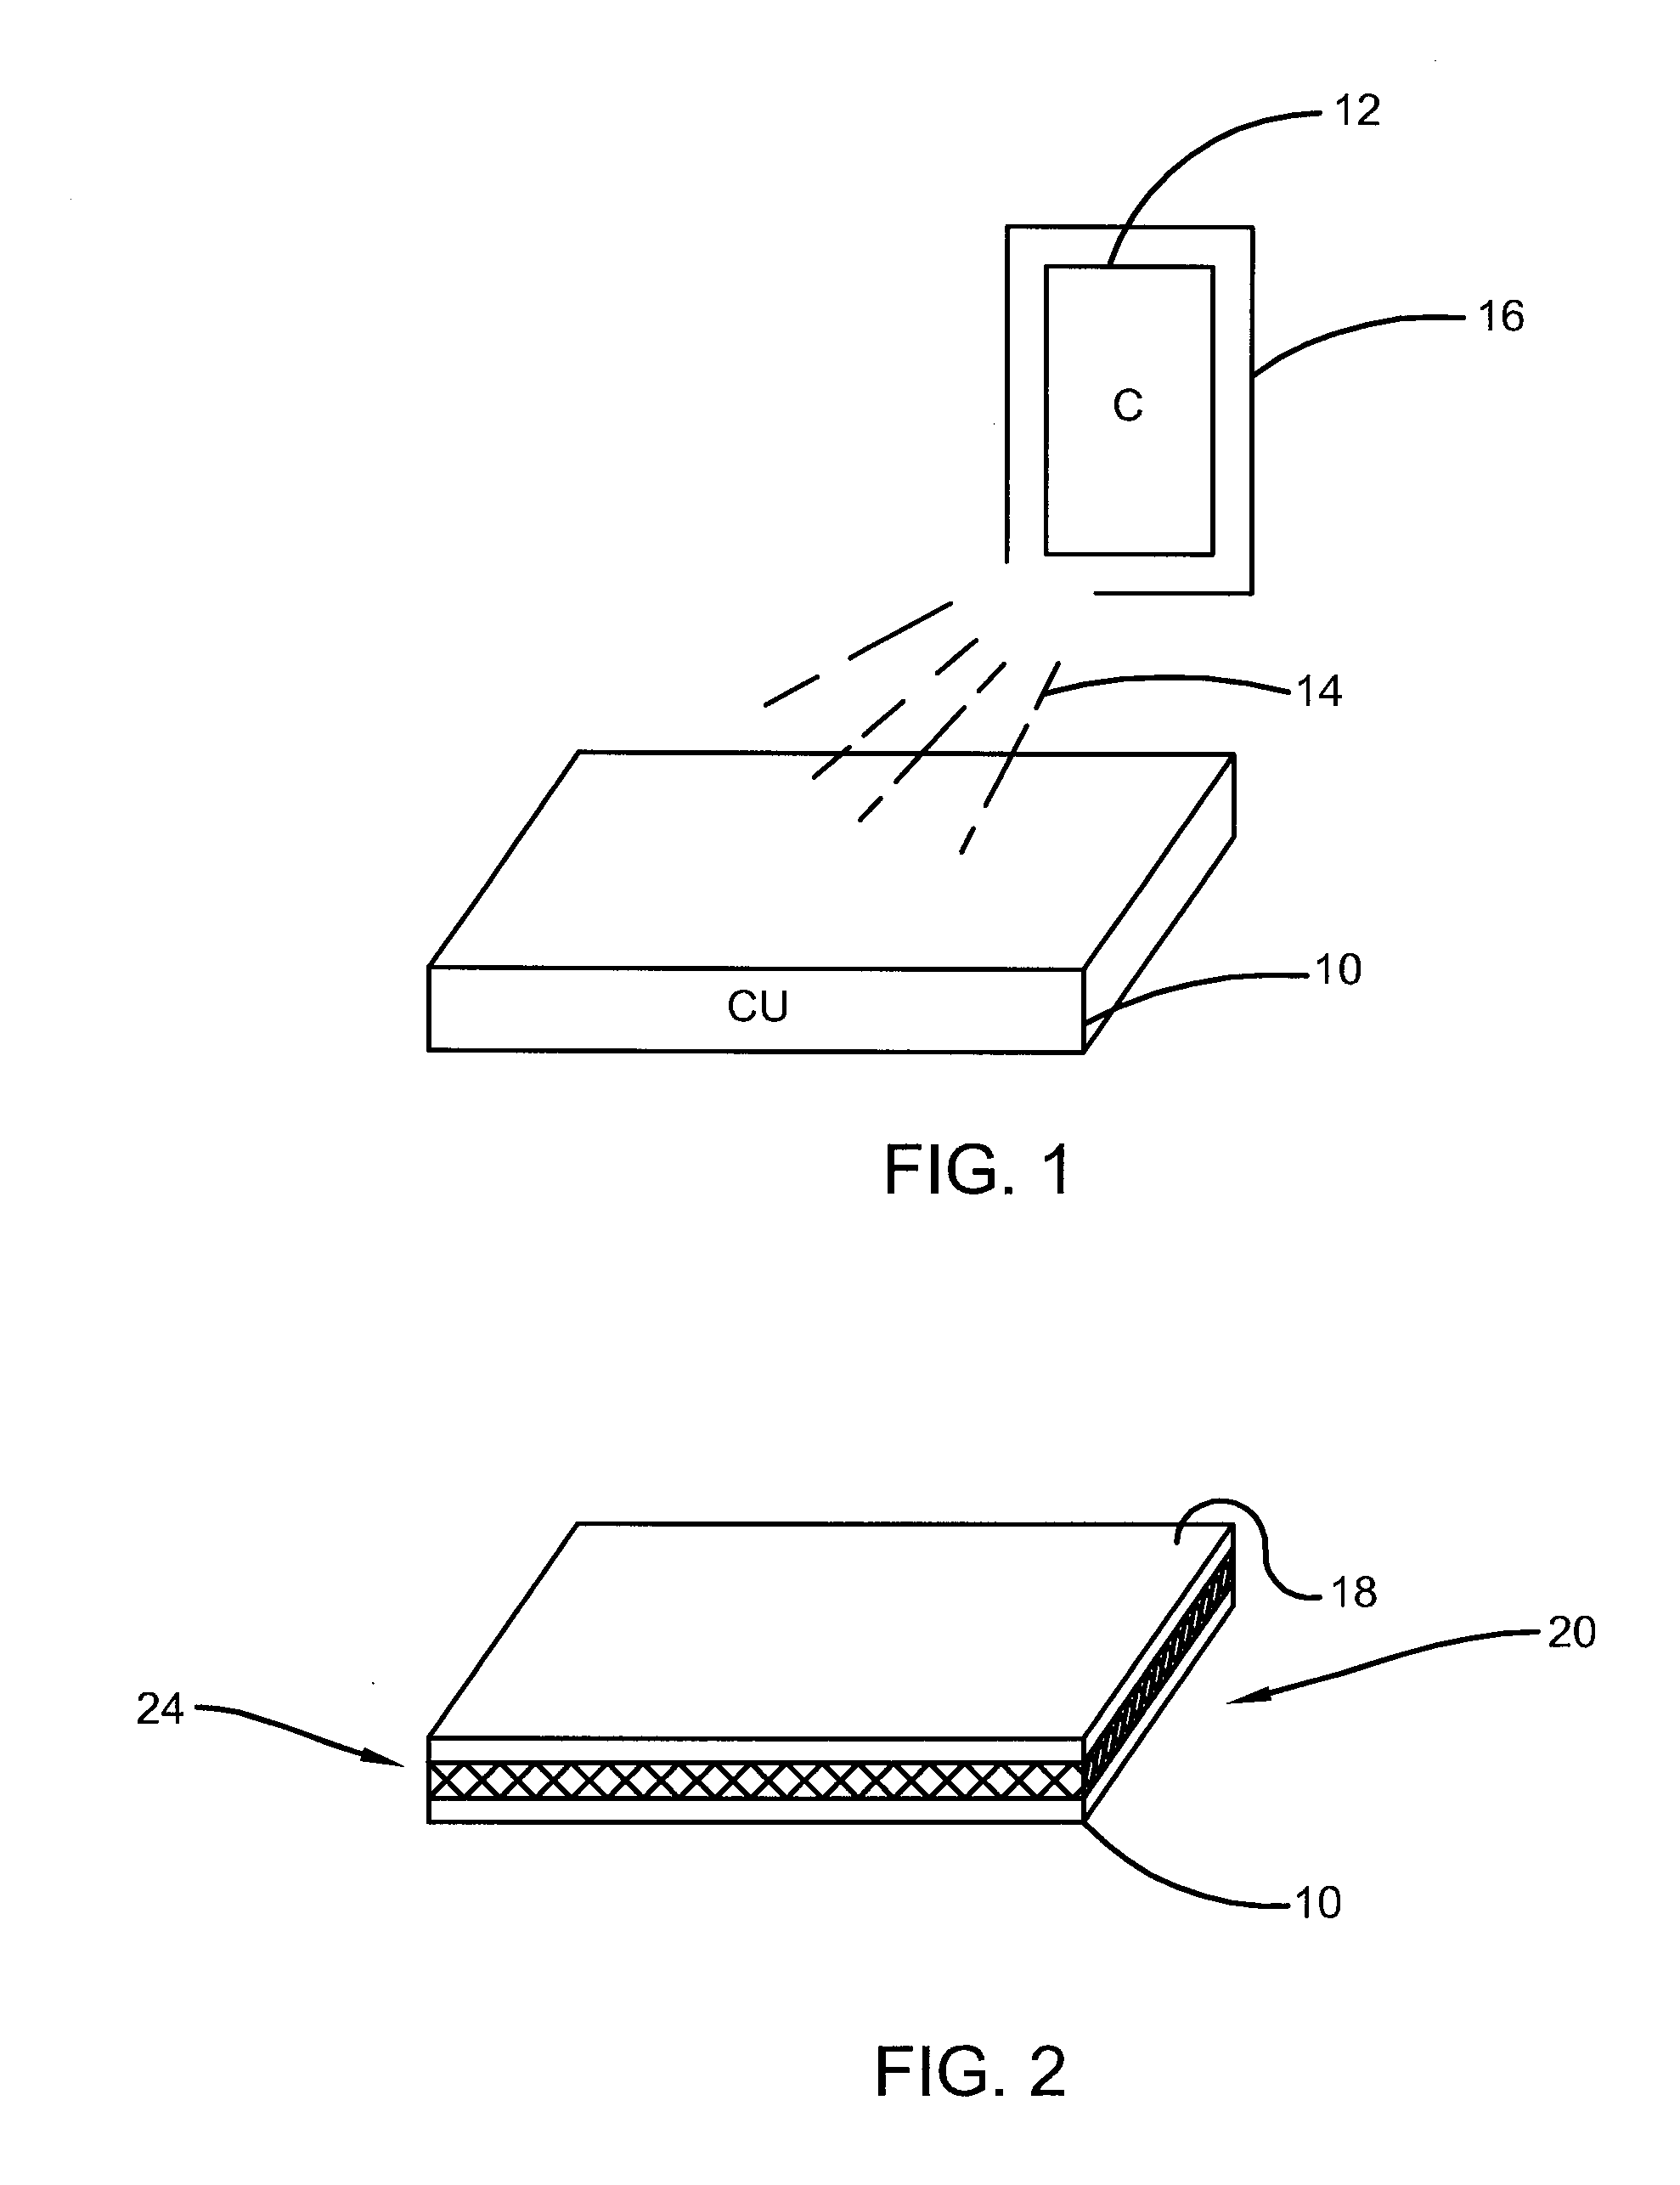 Method of separating an atomically thin material from a substrate